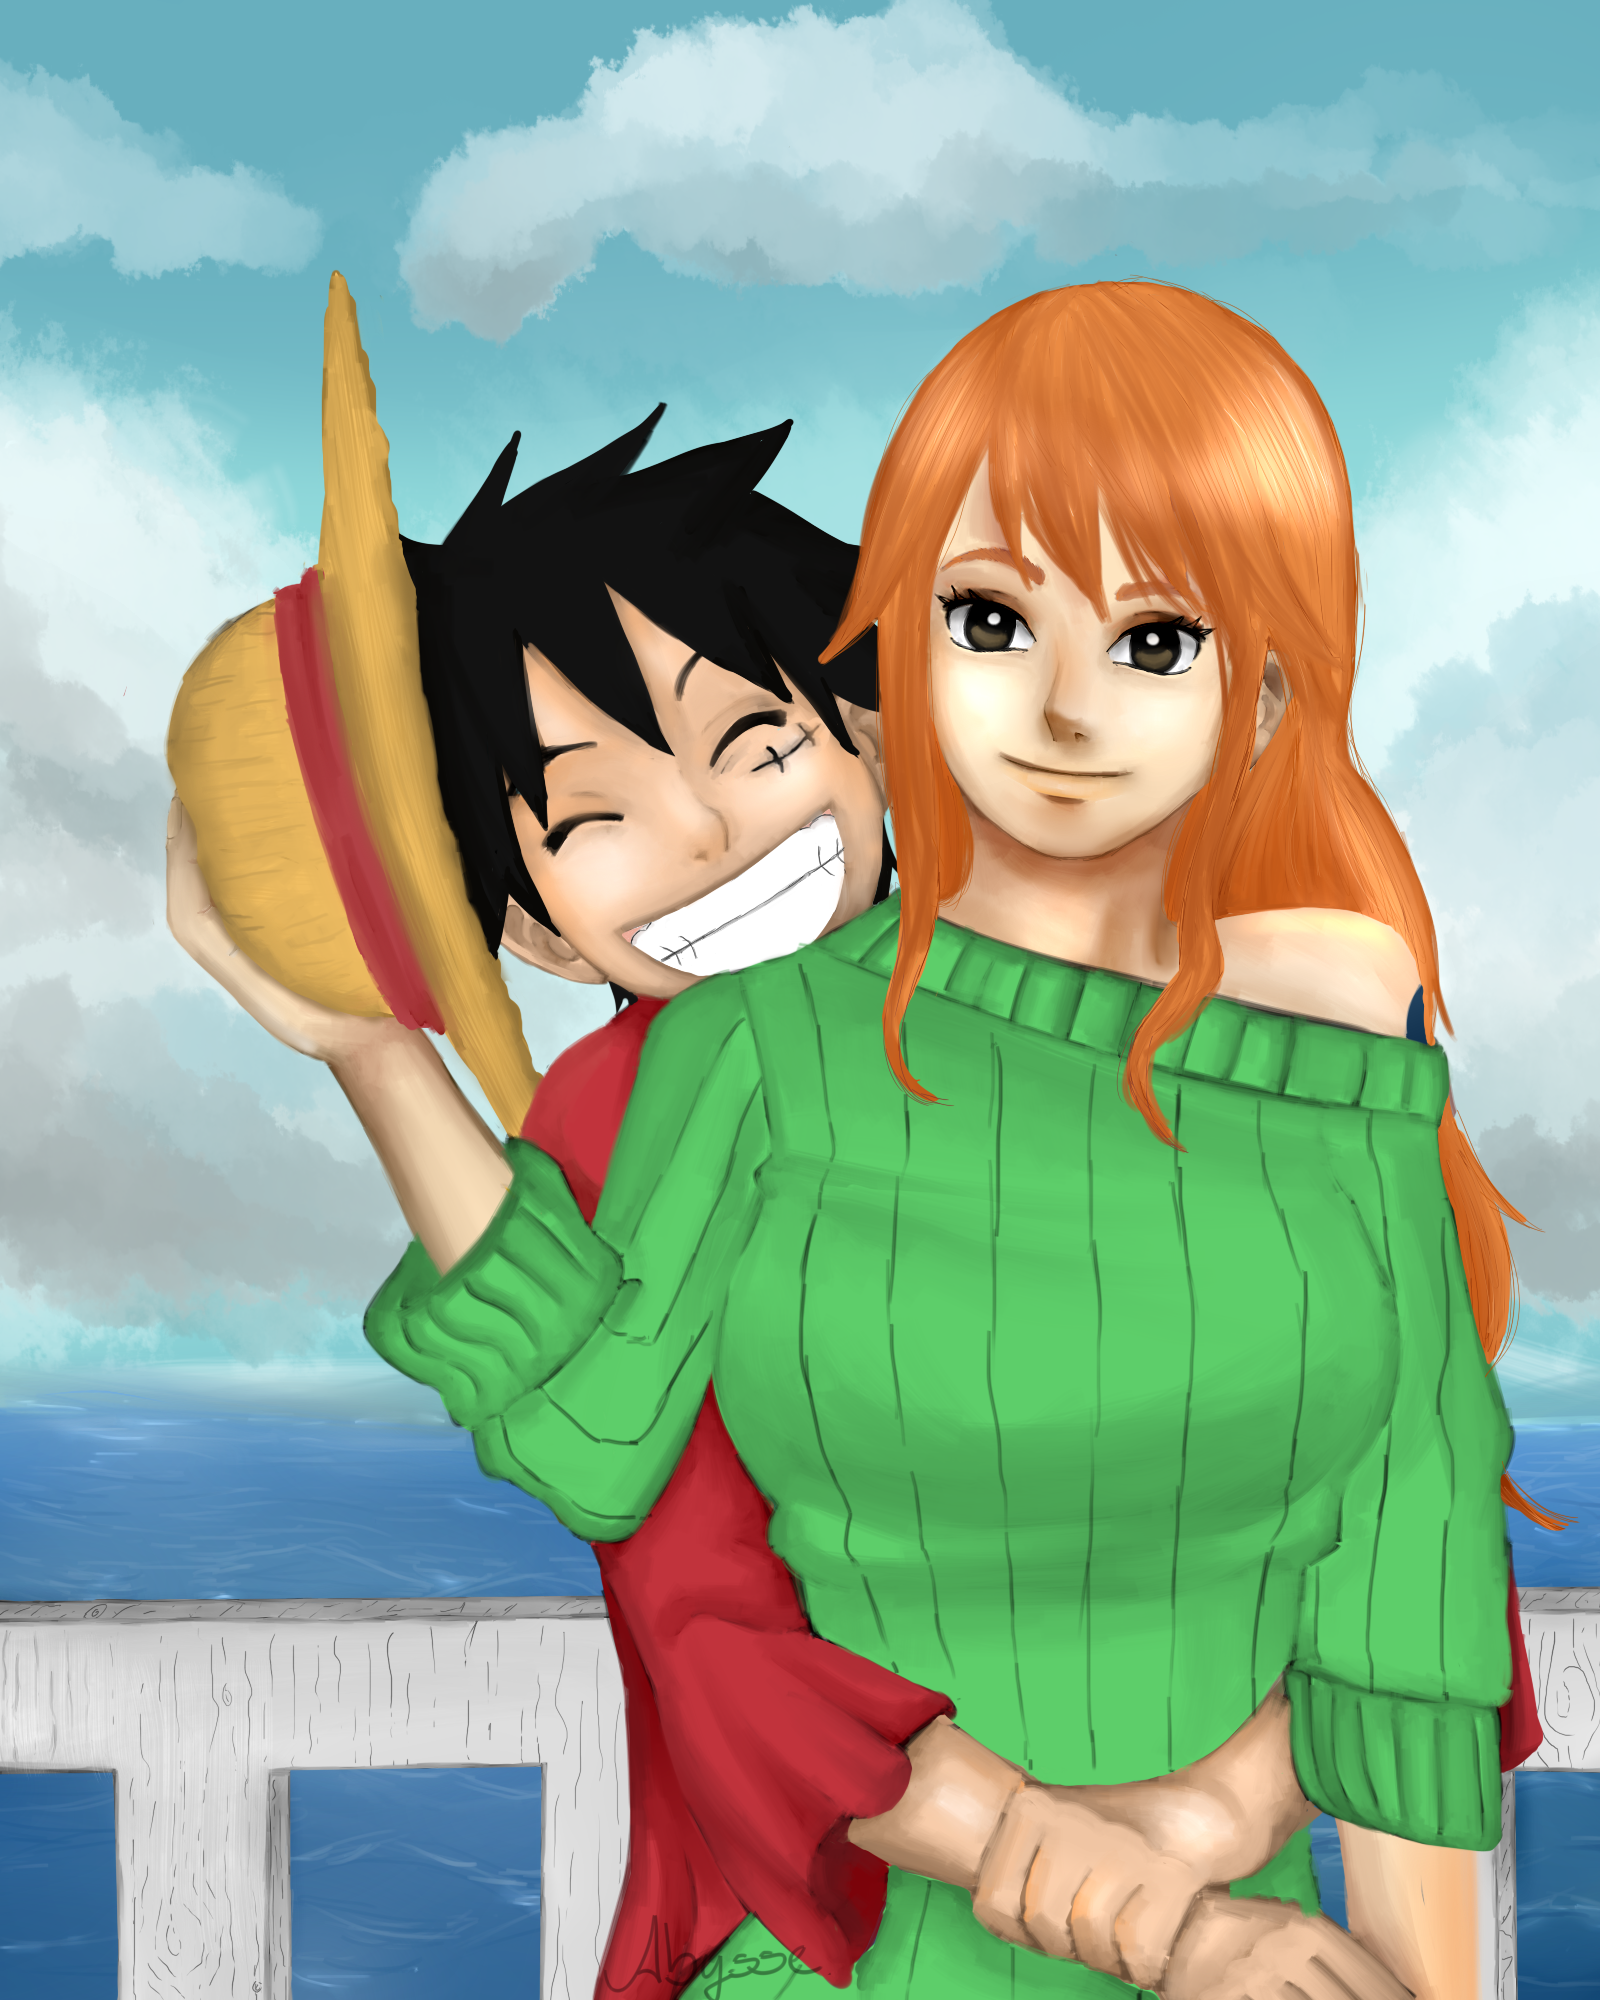 Piece nami one luffy and Netflix's One